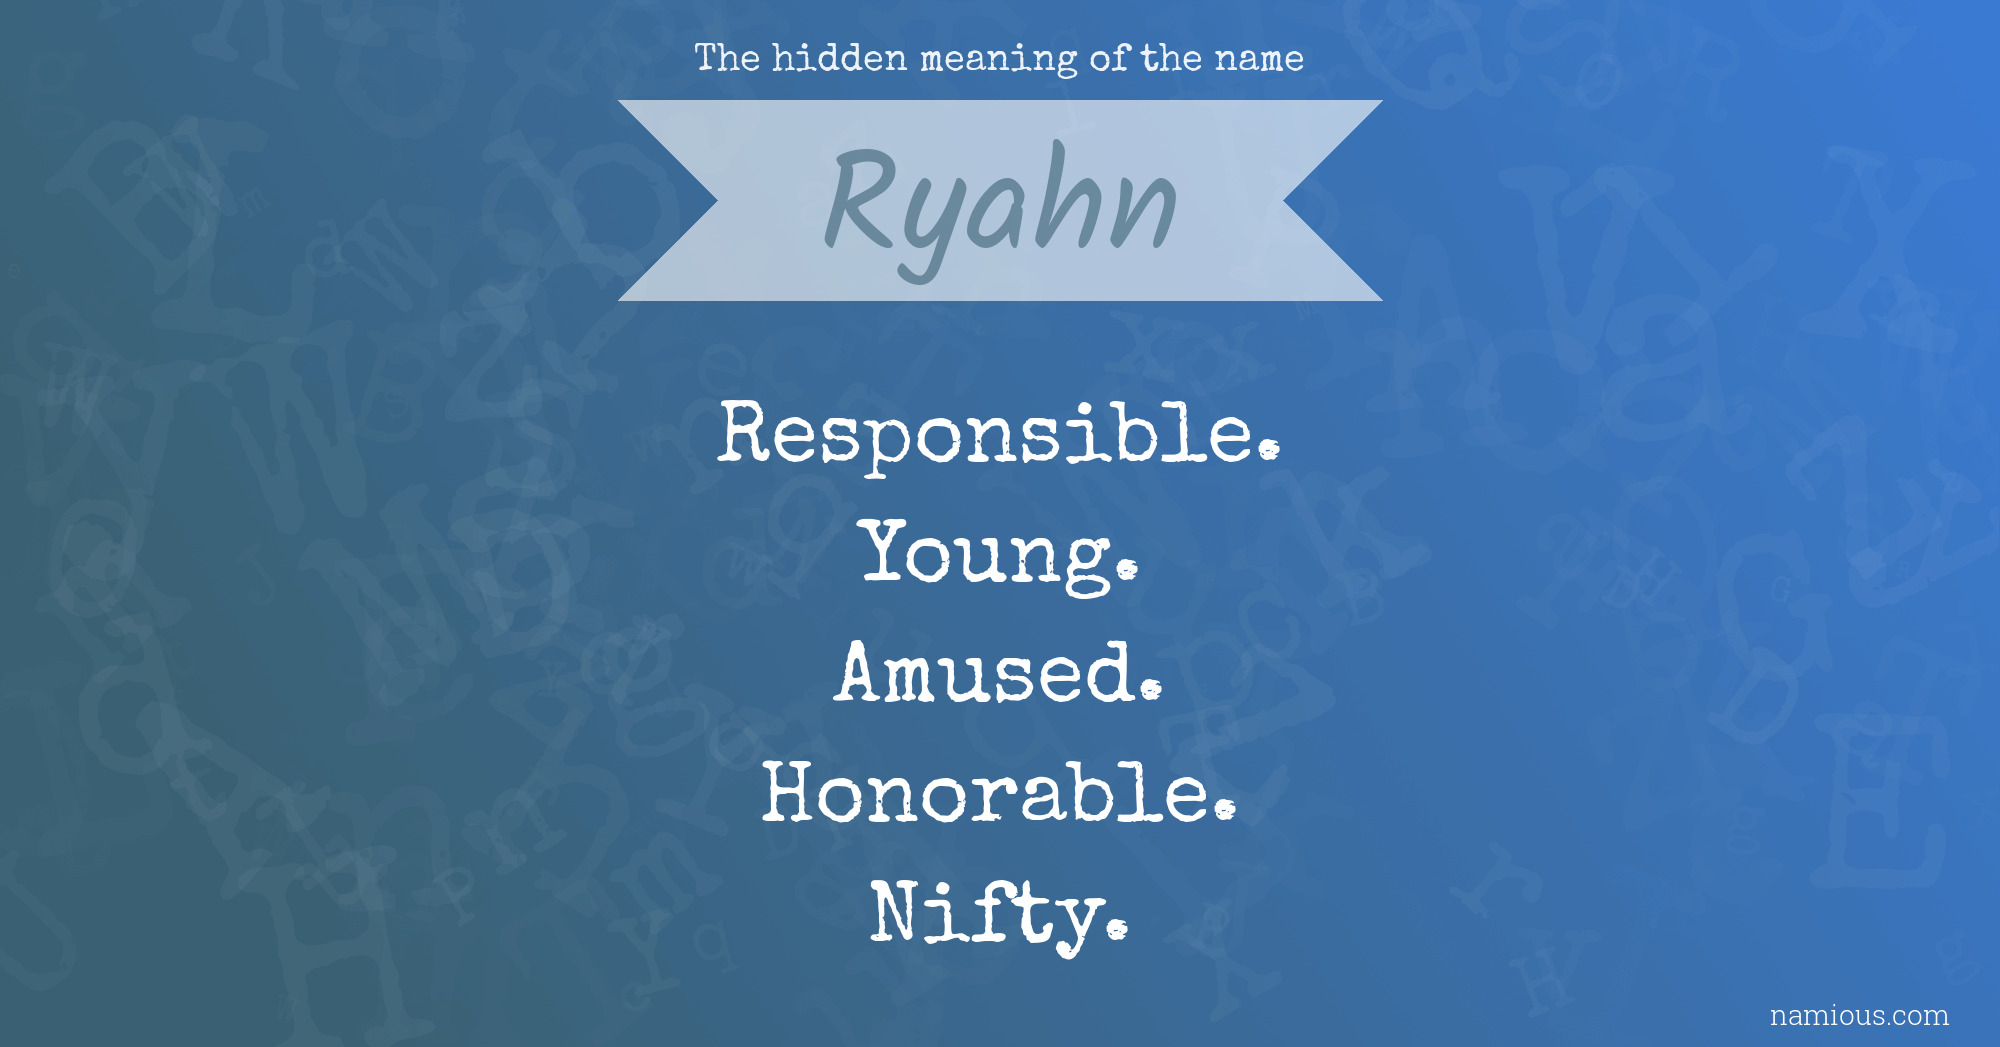 The hidden meaning of the name Ryahn